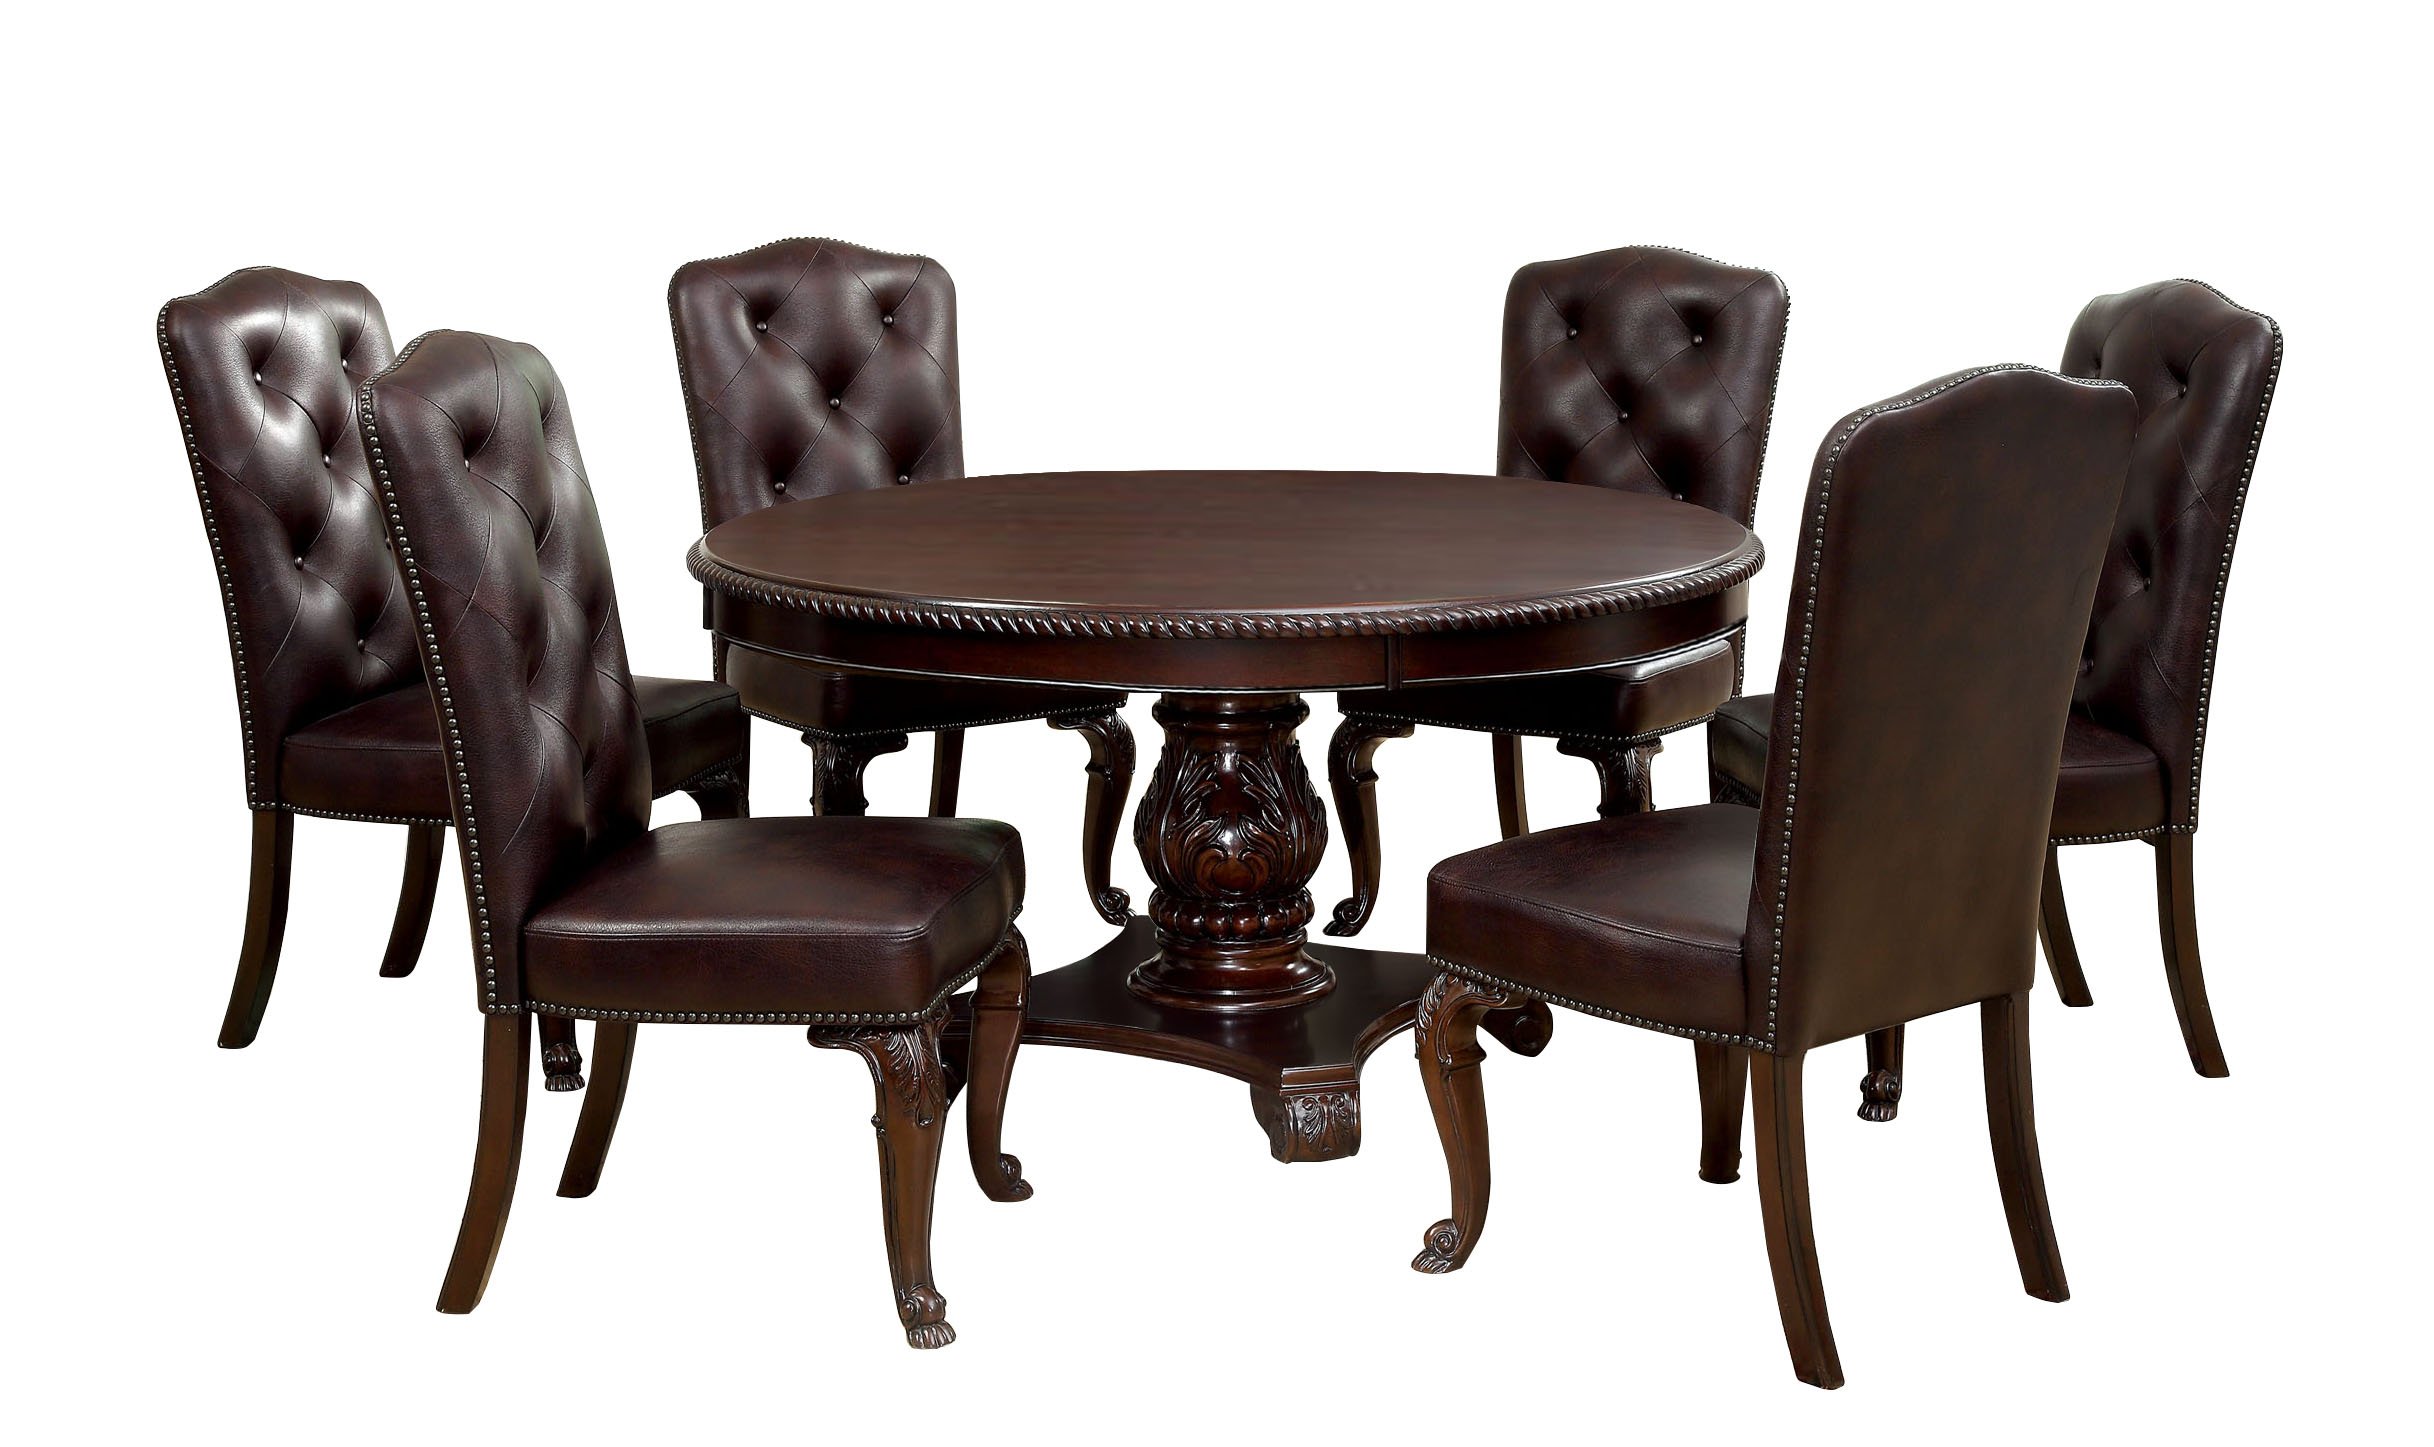 Furniture of America Evangelyn 7-Piece Dining Set with Leather-Like chairs